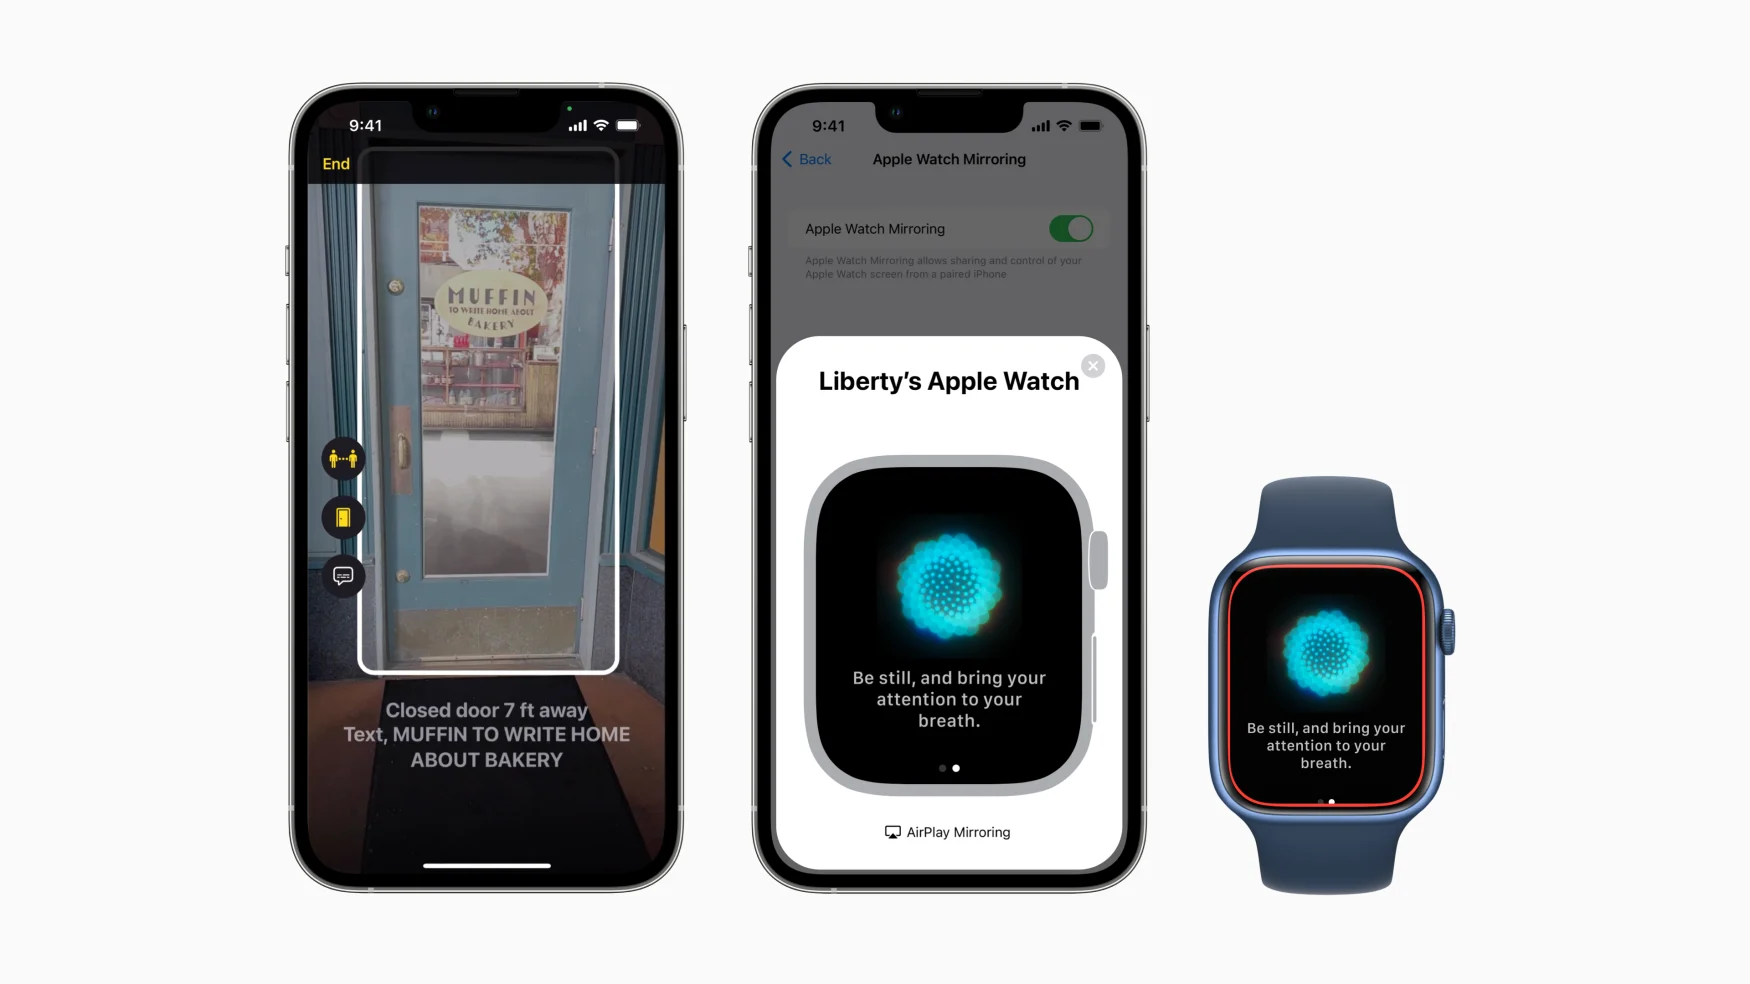 Two iPhones and an Apple Watch showcasing Apple's new accessibility features. The iPhone on the left shows Magnifier's new door detection tool, while the iPhone in the middle and the clock on the right show the new mirroring feature.